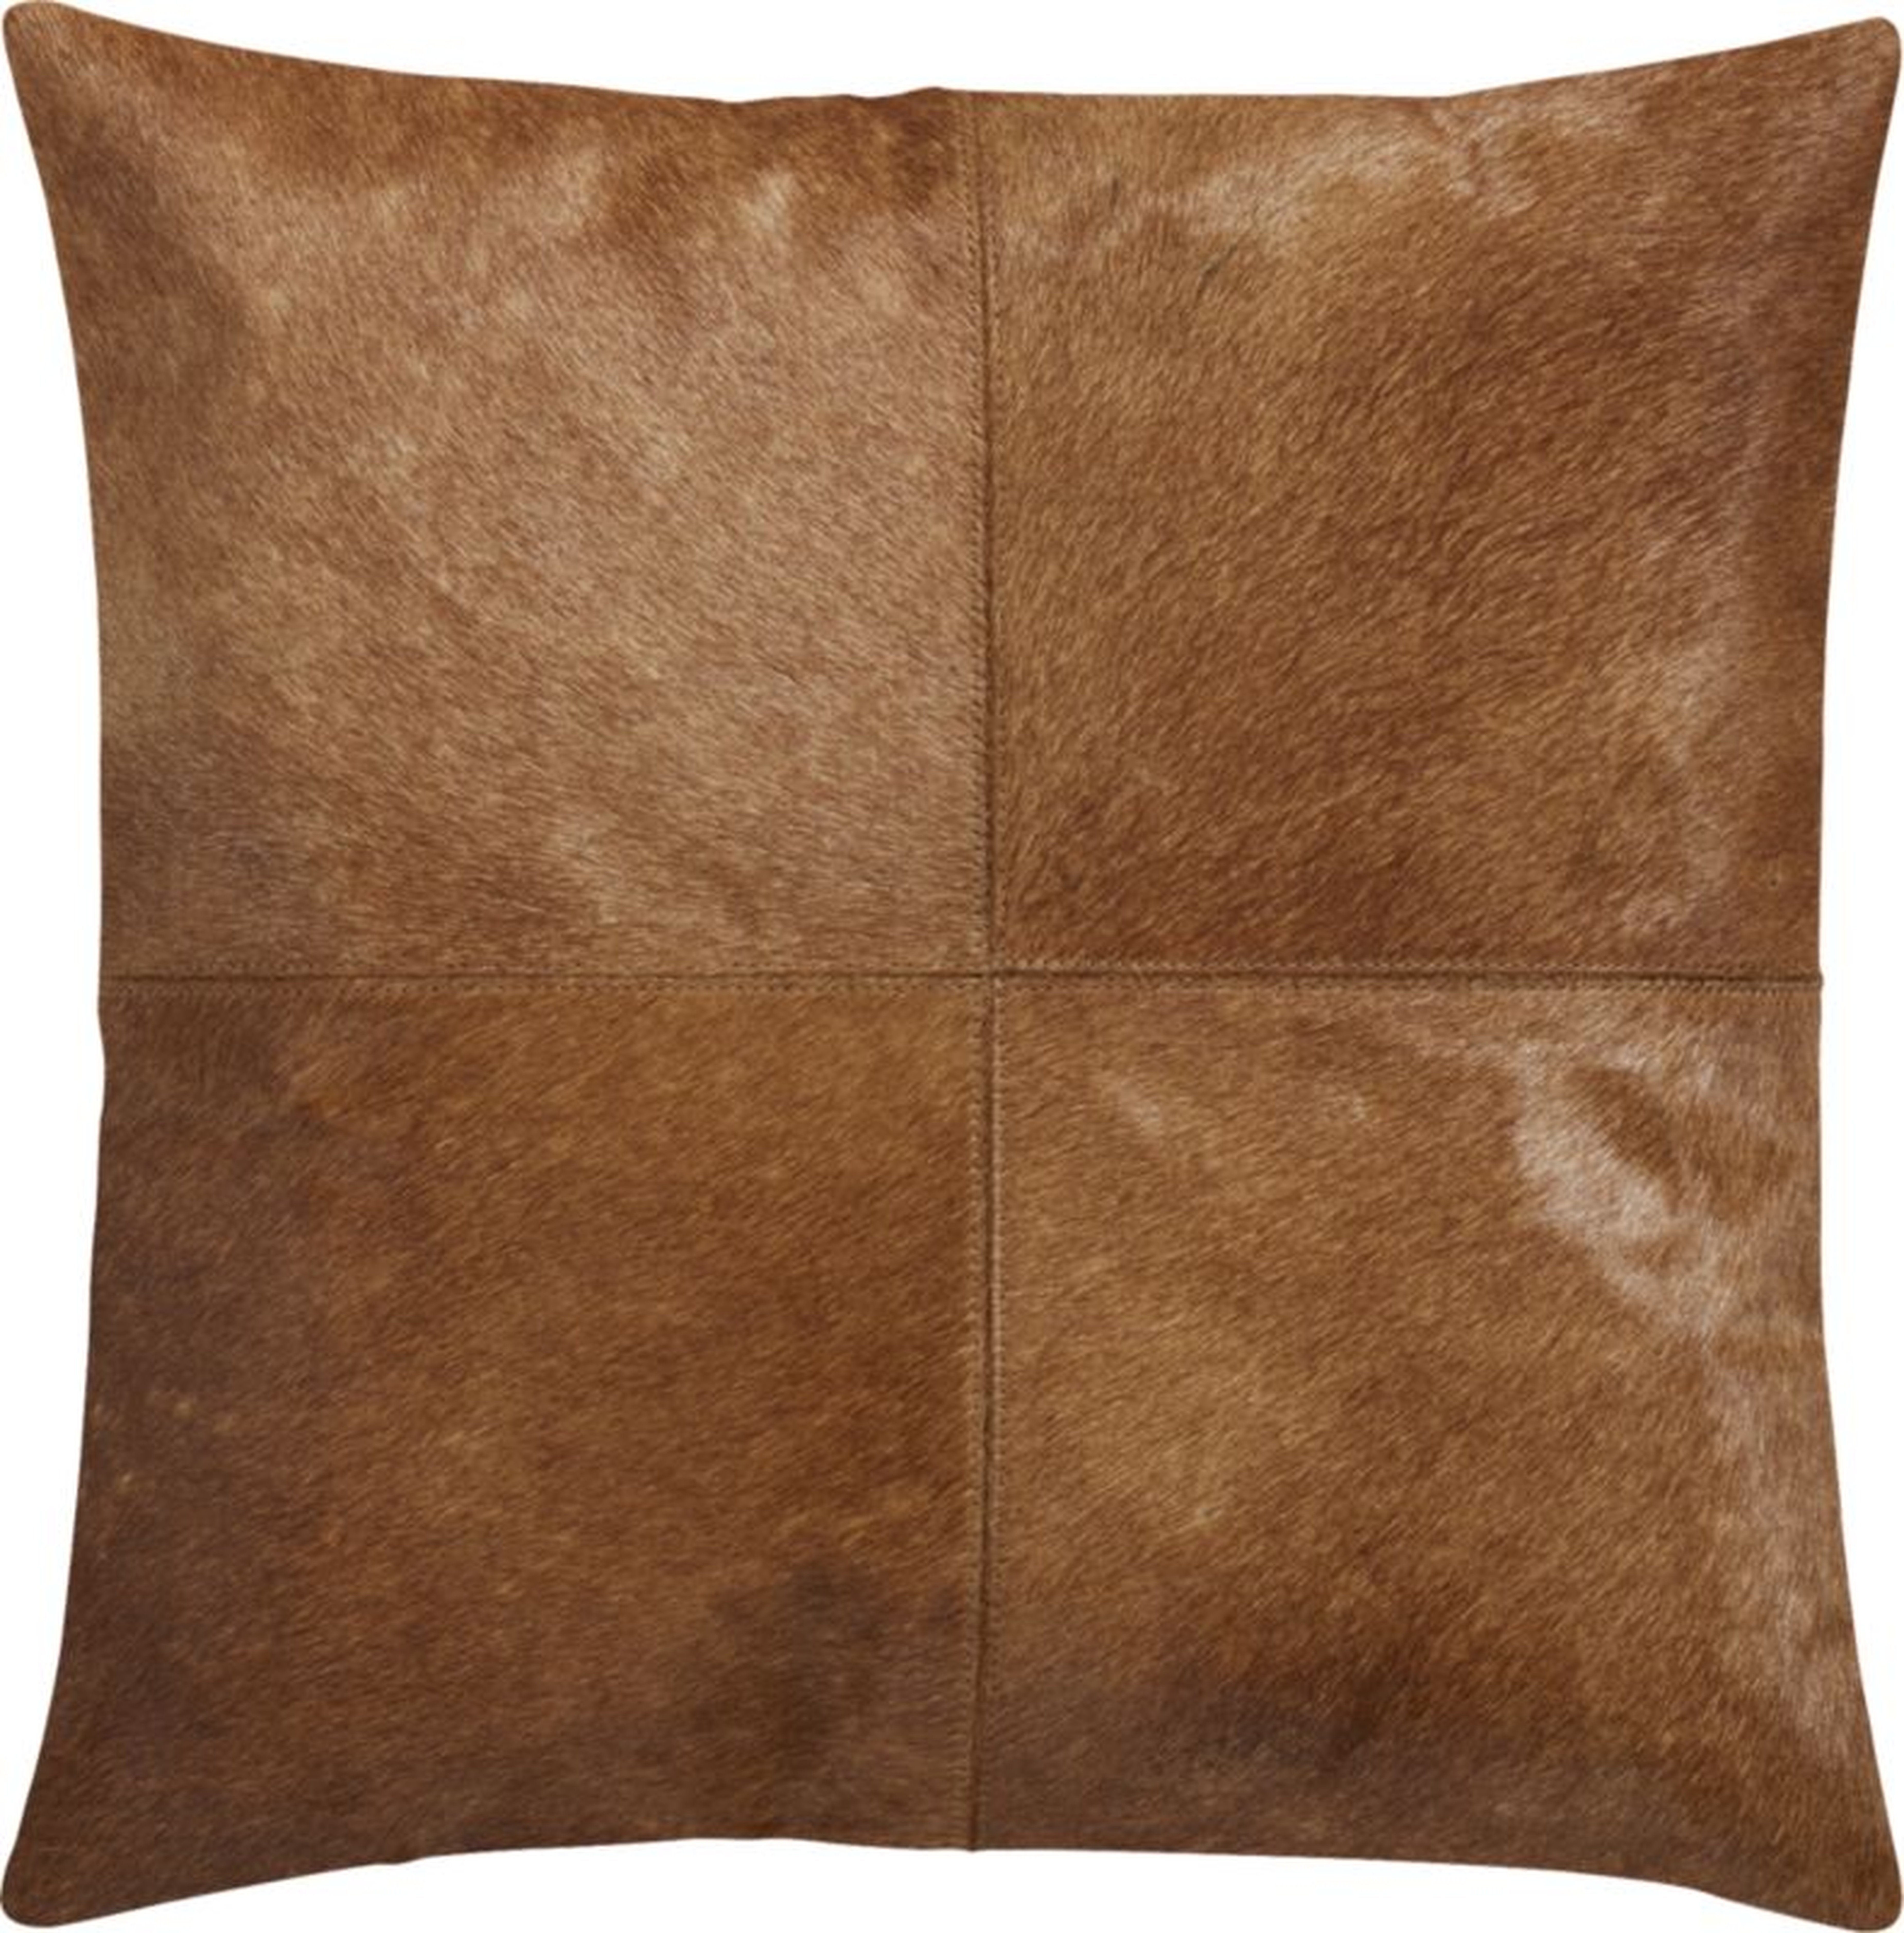 "18" Light Brown Cowhide Pillow with Down-Alternative Insert" - CB2